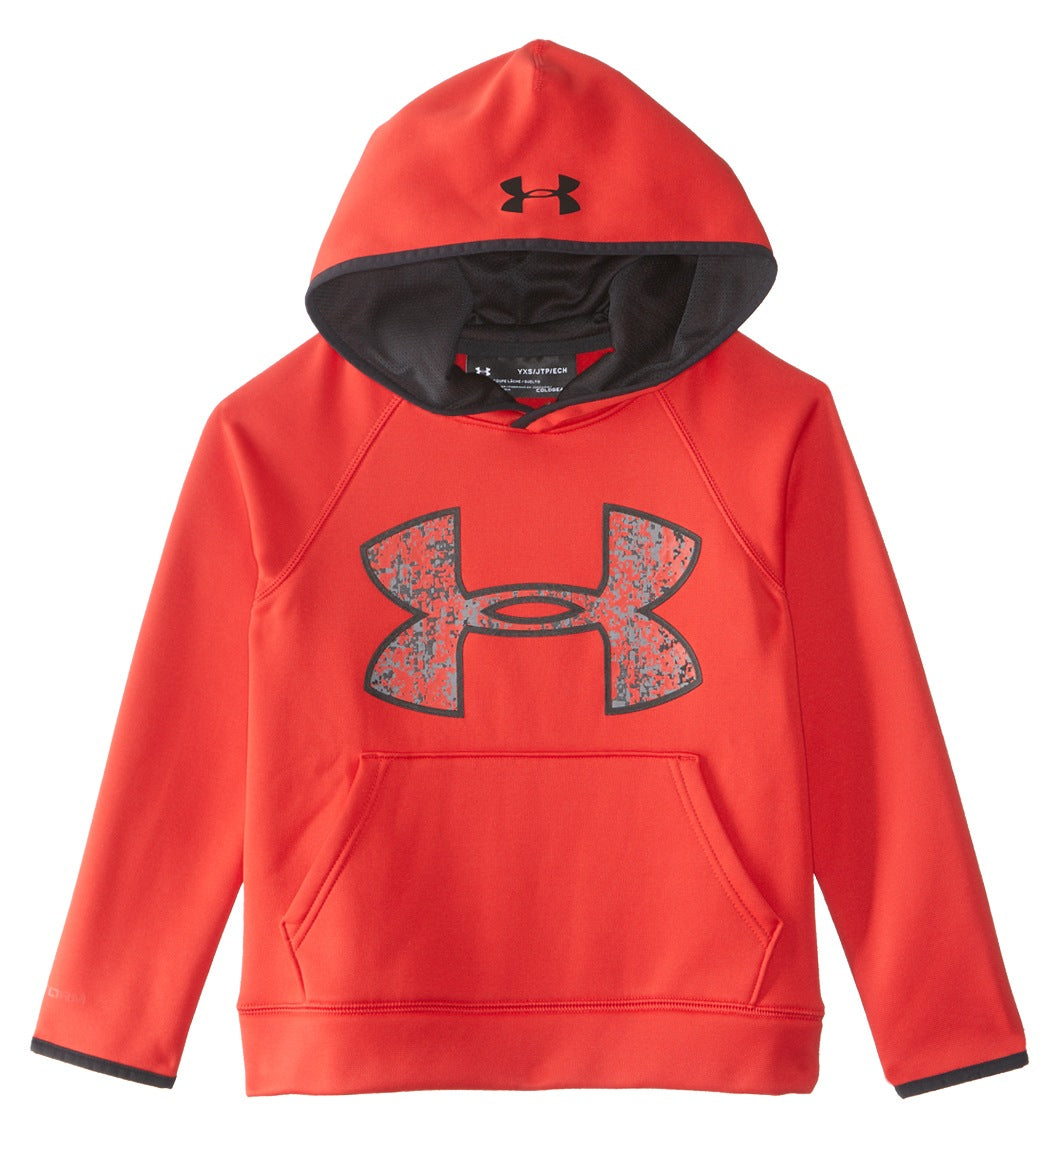 Under Armour Boys' Af Big Logo Hoody - Red-Black -Red X-Small Red/Black /Red Cotton/Polyester - Swimoutlet.com